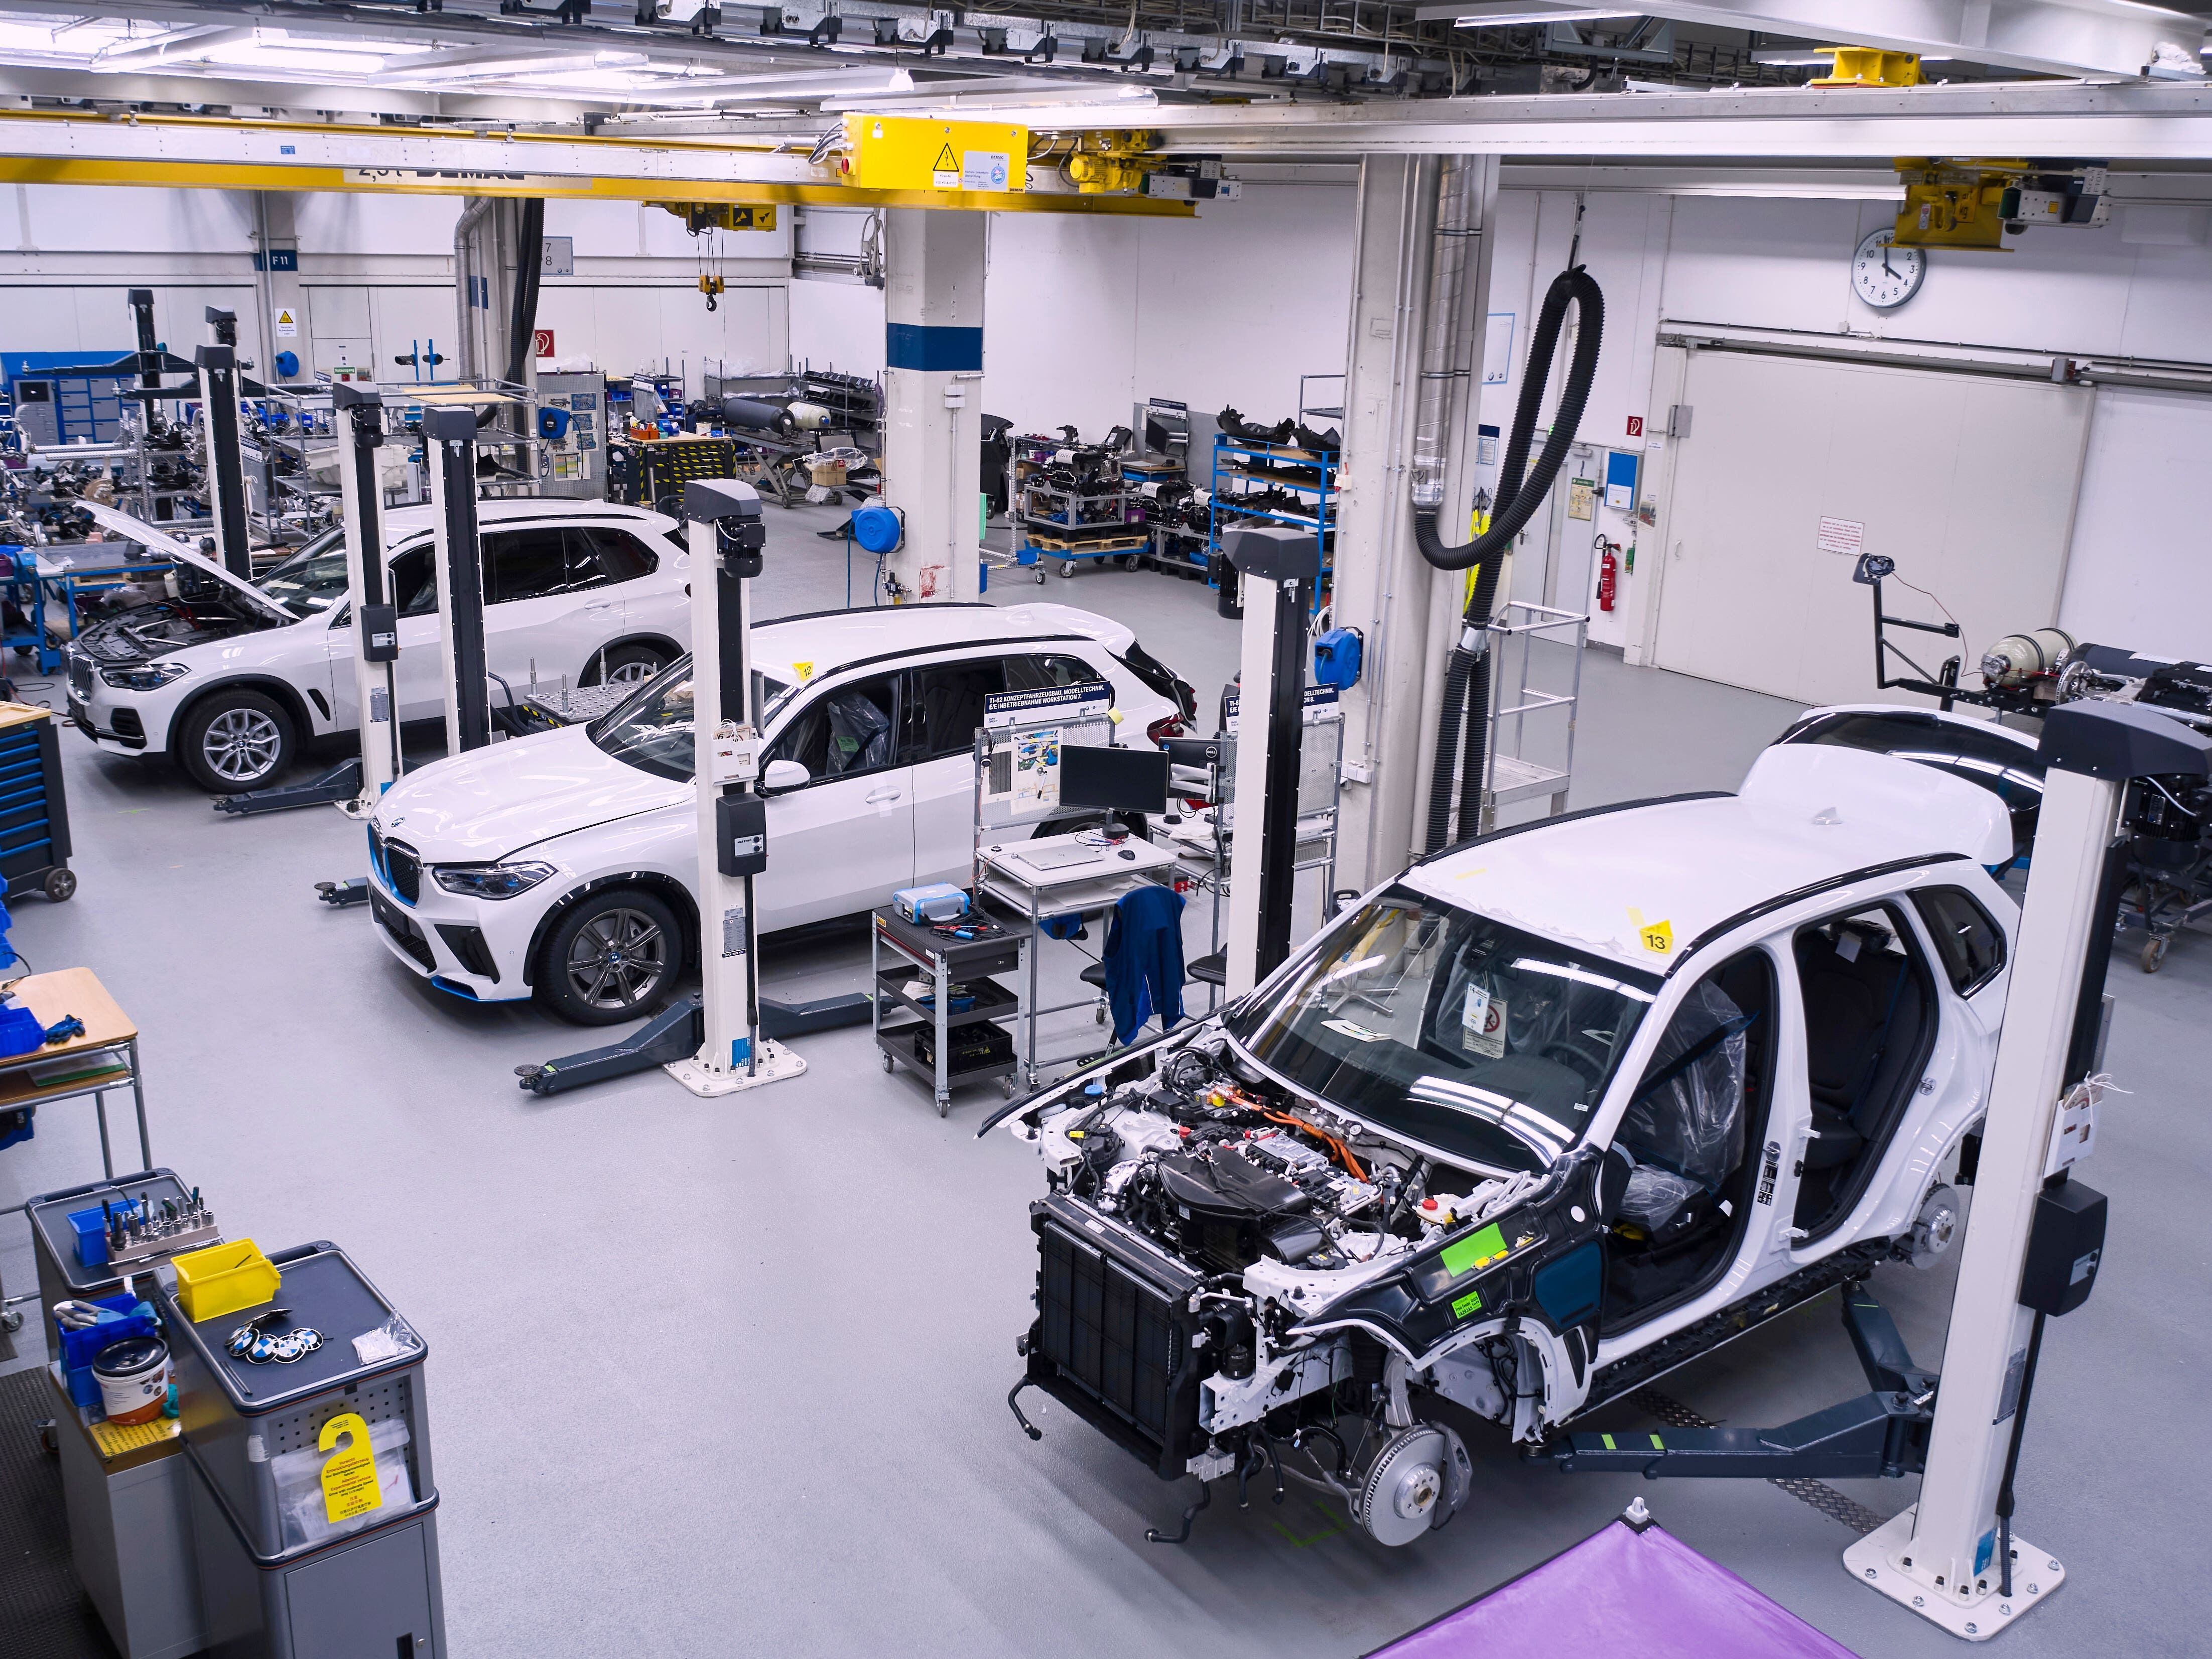 BMW kickstarts small-scale production of hydrogen-powered X5